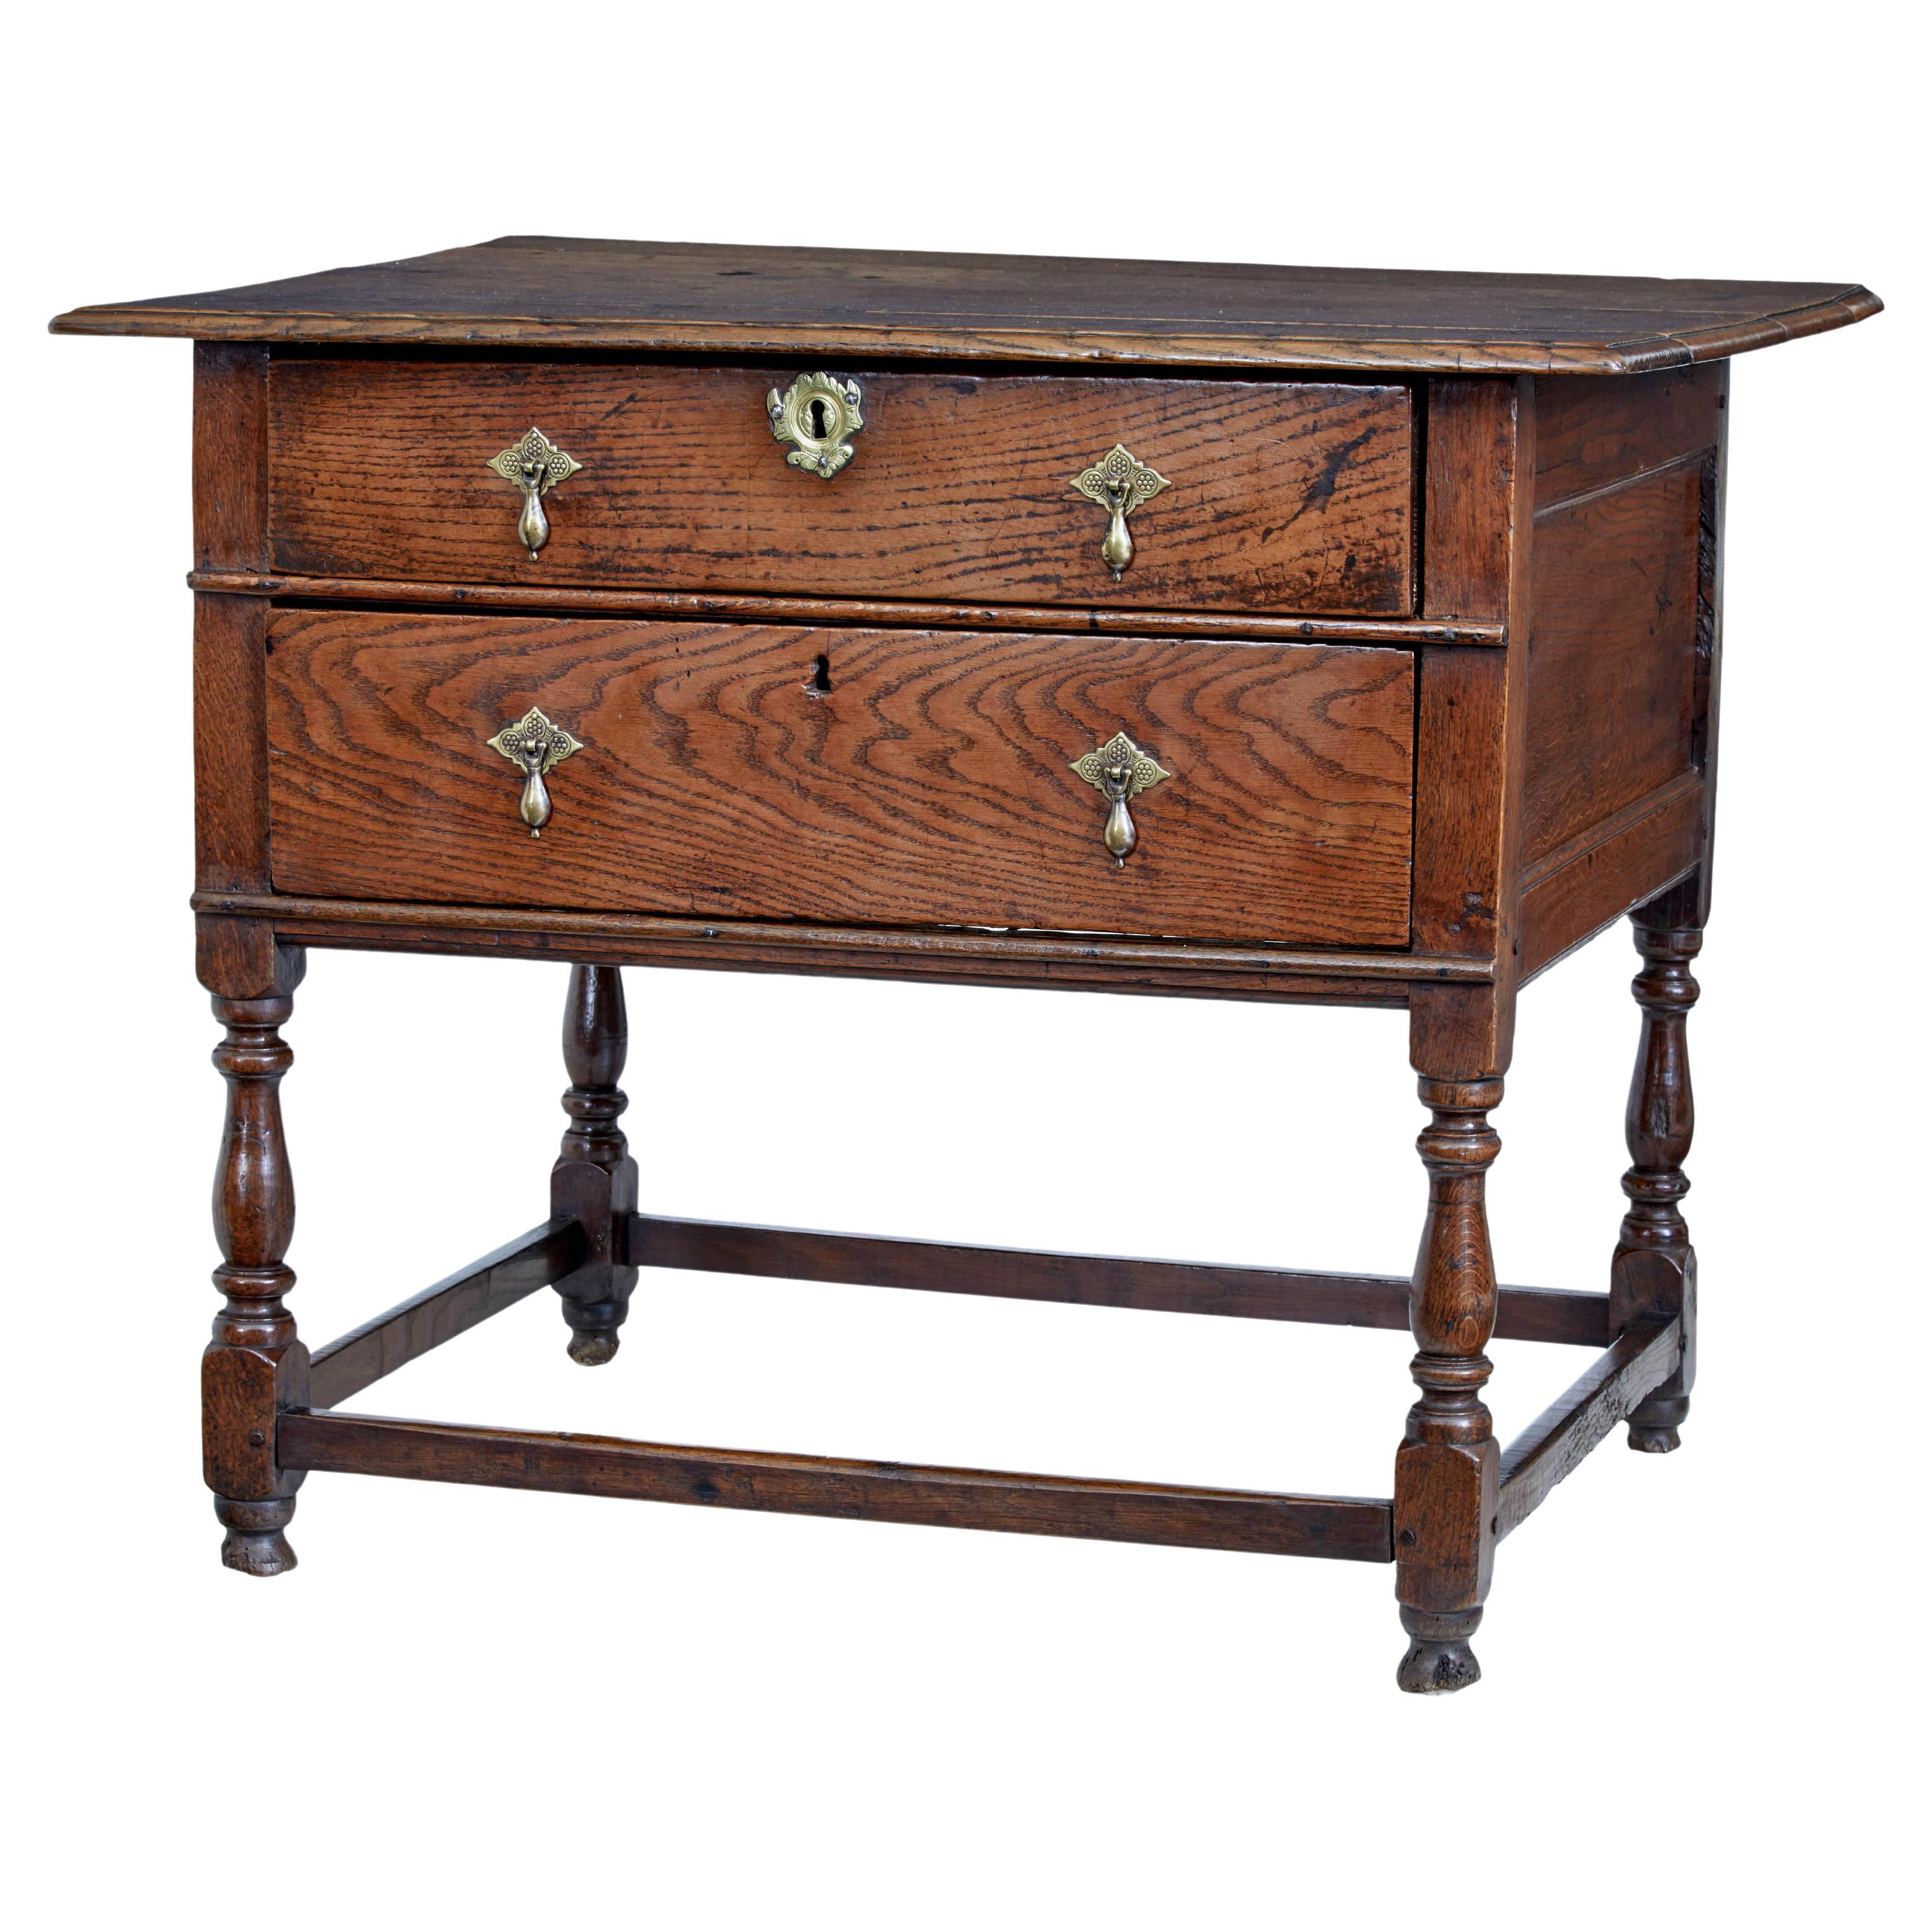 Early 18th Century English 2 Drawer Oak Side Table